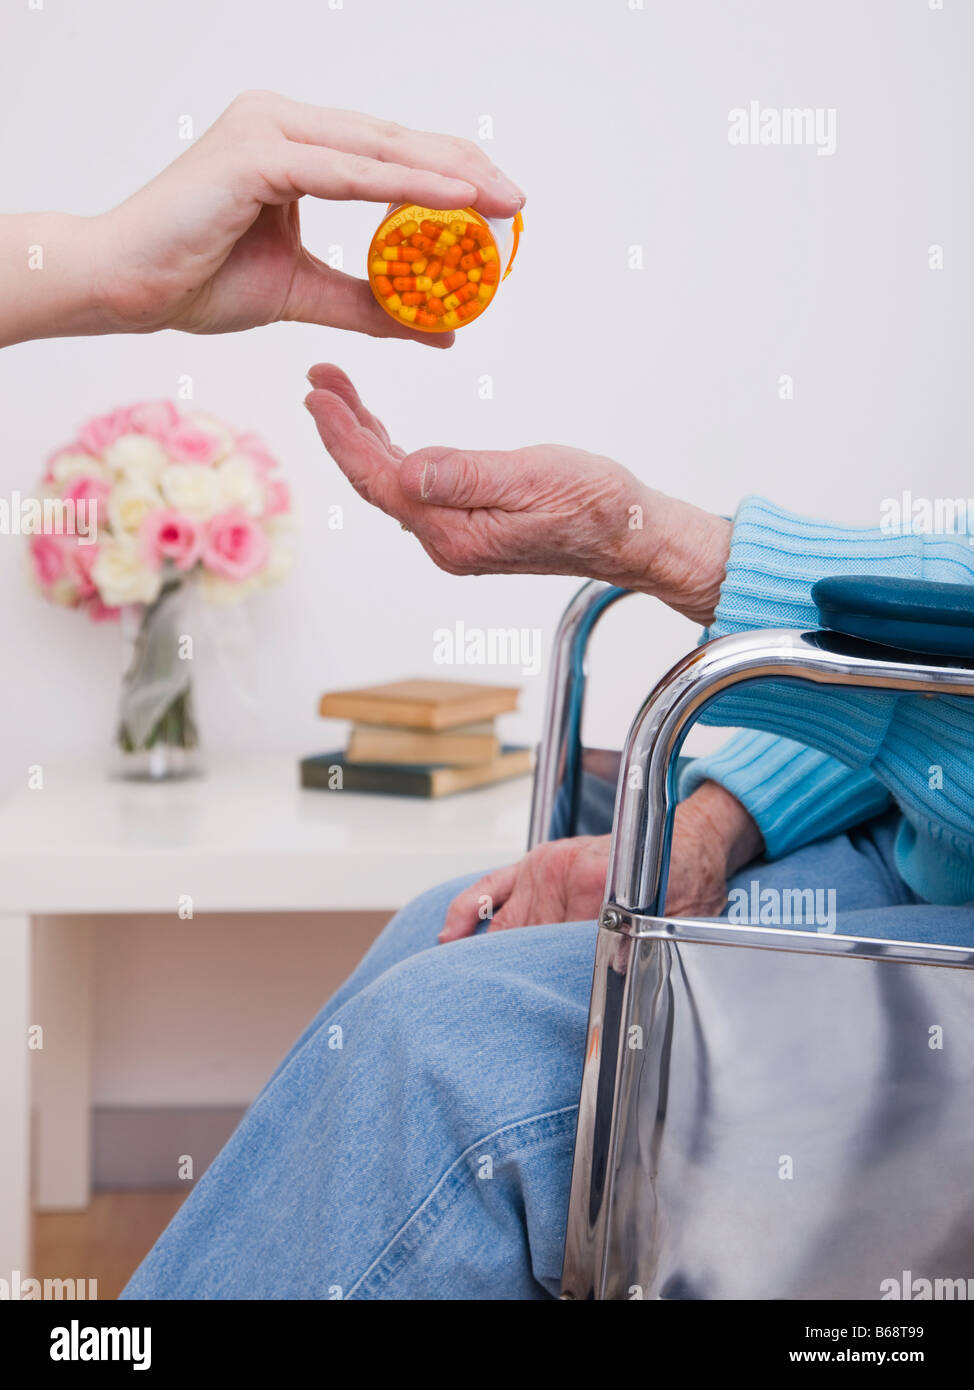 Young woman giving pills to senior woman, close-up of hands Stock Photo